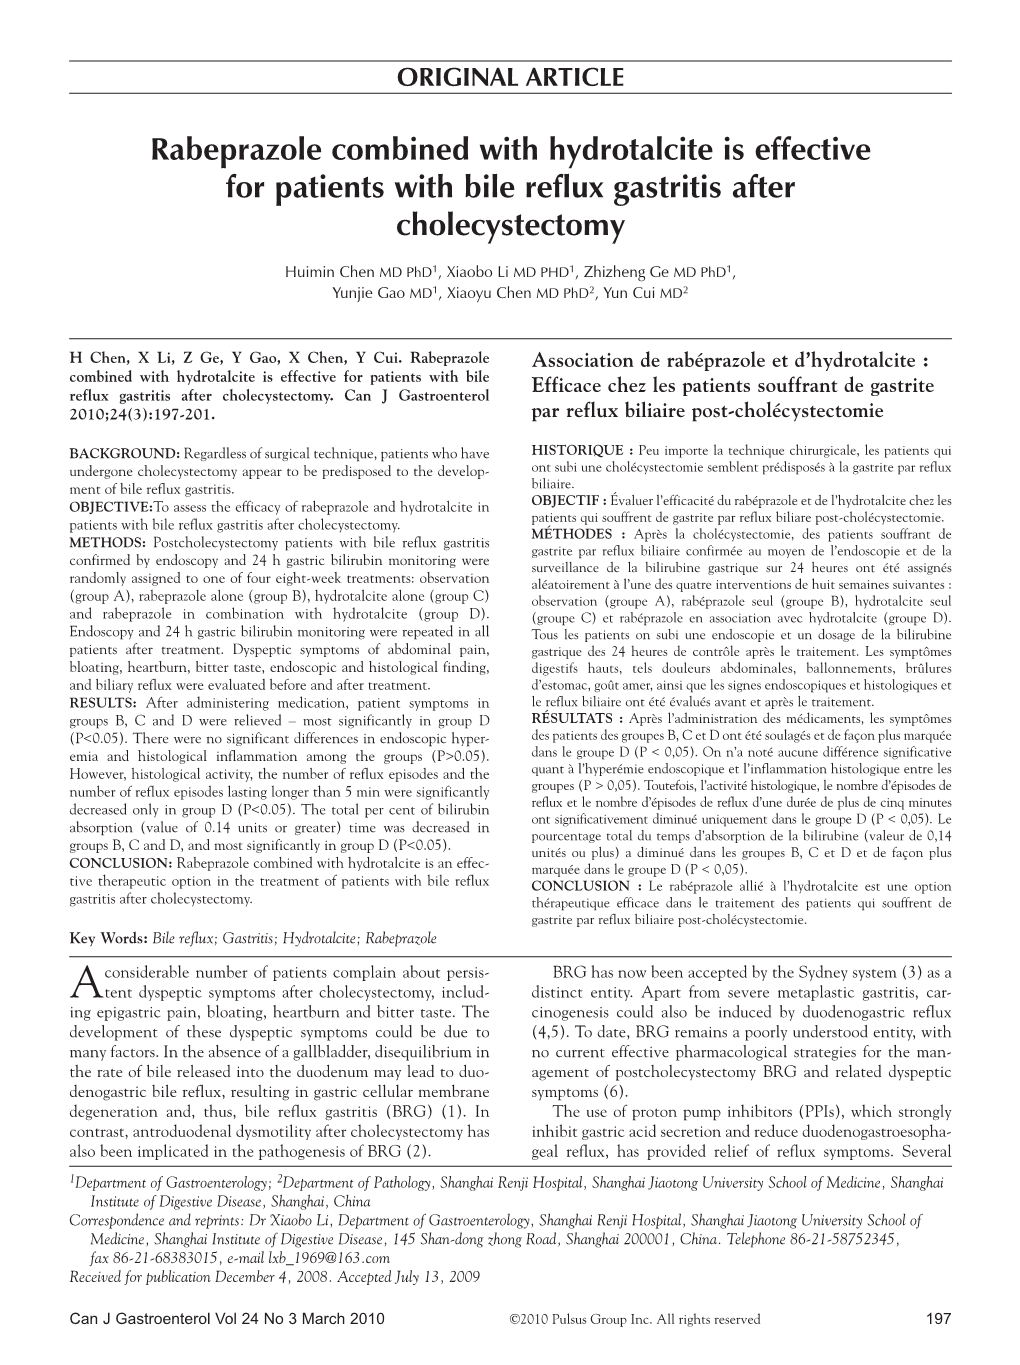 Rabeprazole Combined with Hydrotalcite Is Effective for Patients with Bile Reflux Gastritis After Cholecystectomy